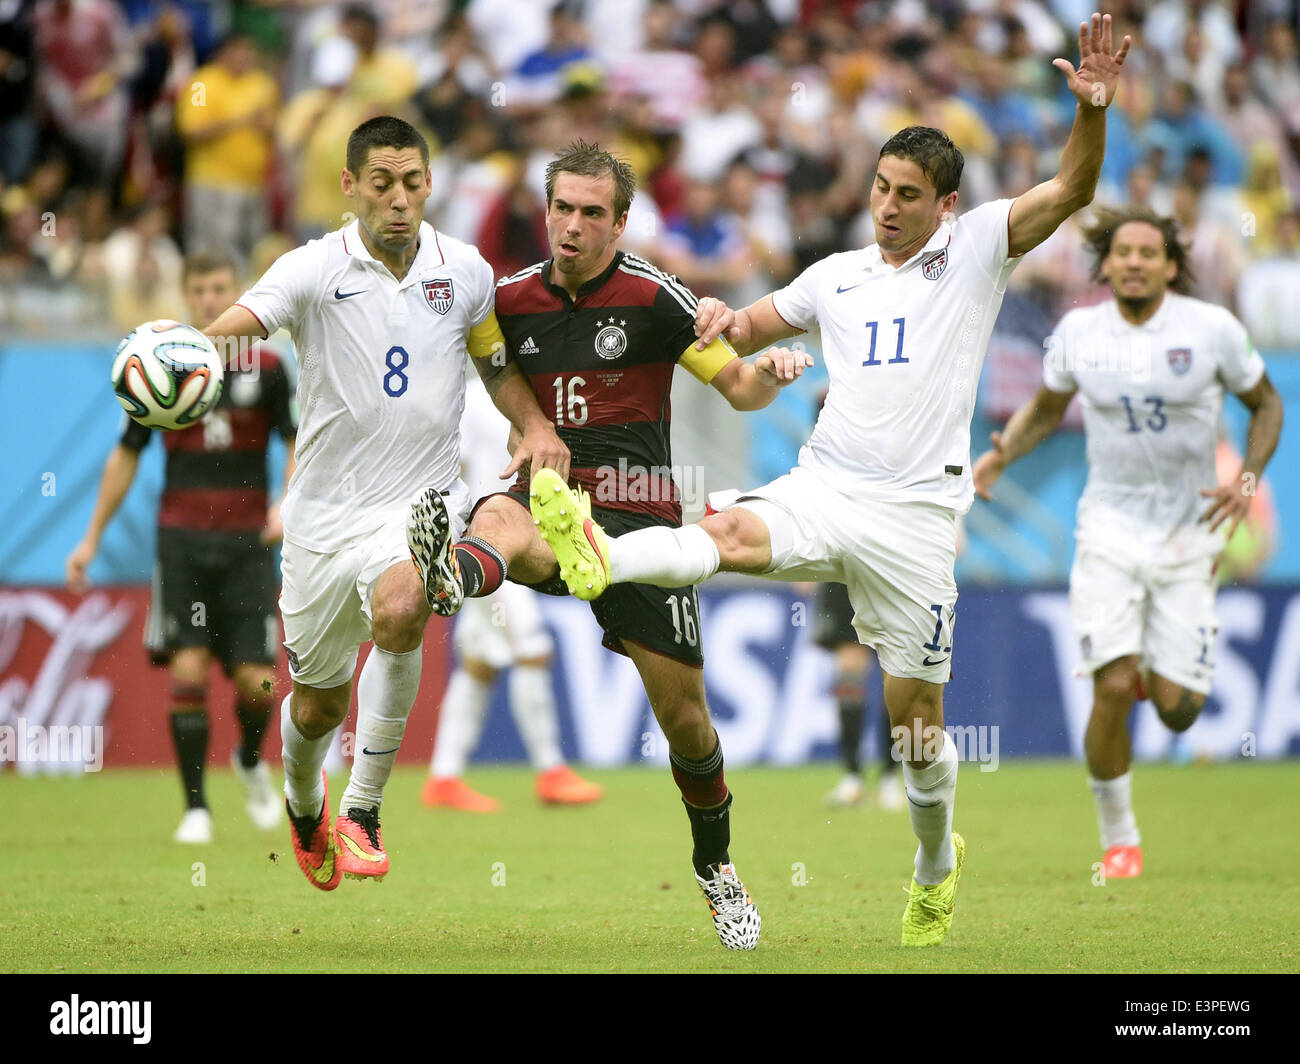 Recife, Brazil. 26th June, 2014. Germany's Philipp Lahm (C, front) vies with Clint Dempsey (L, front) and Alejandro Bedoya of the U.S. during a Group G match between the U.S. and Germany of 2014 FIFA World Cup at the Arena Pernambuco Stadium in Recife, Brazil, on June 26, 2014. Germany won 1-0 over the U.S. on Thursday. Germany and the U.S. enter Round of 16 from Group G. Credit:  Lui Siu Wai/Xinhua/Alamy Live News Stock Photo